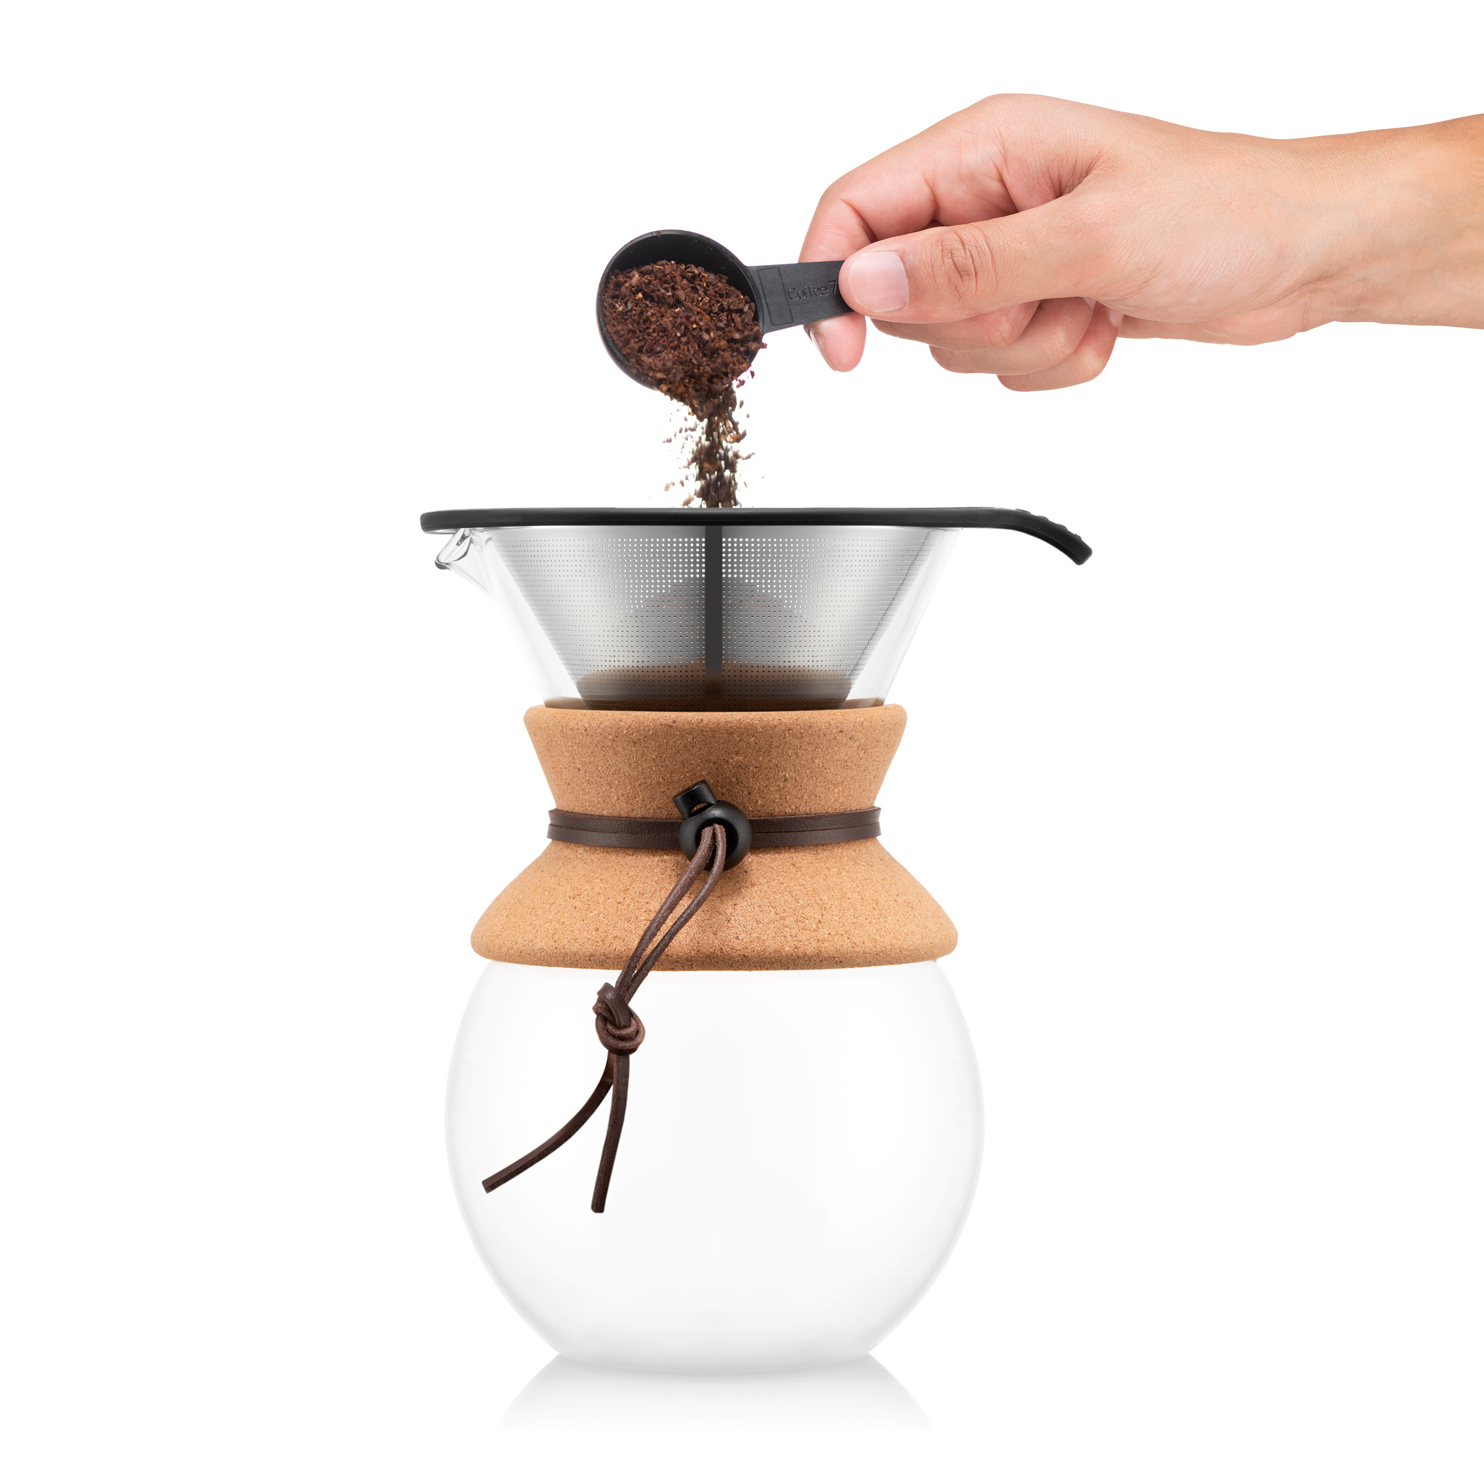 Bodum 34oz Pour Over Coffee Dripper w/ Reusable Stainless Steel Filter, Brown, Cork - image 3 of 11